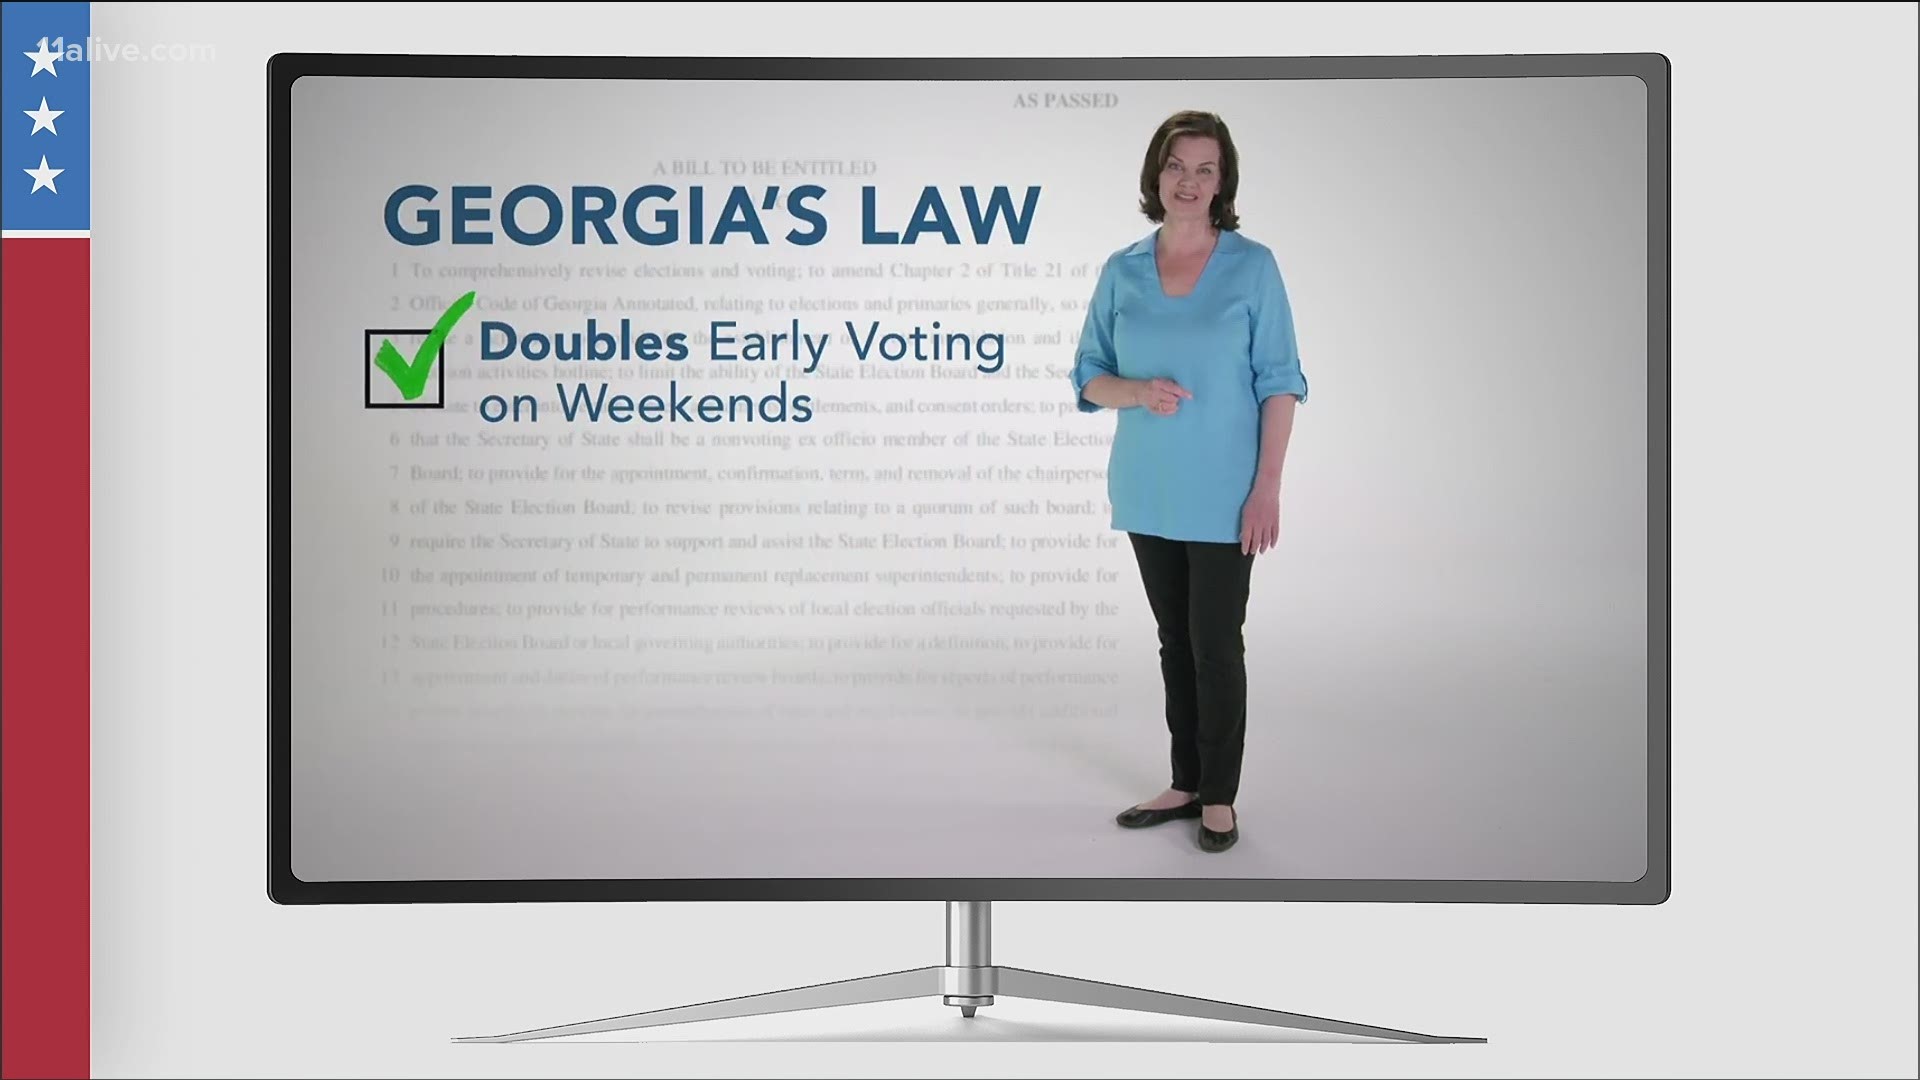 Some people have had a lot of questions about the ad endorsing Georgia's controversial law.